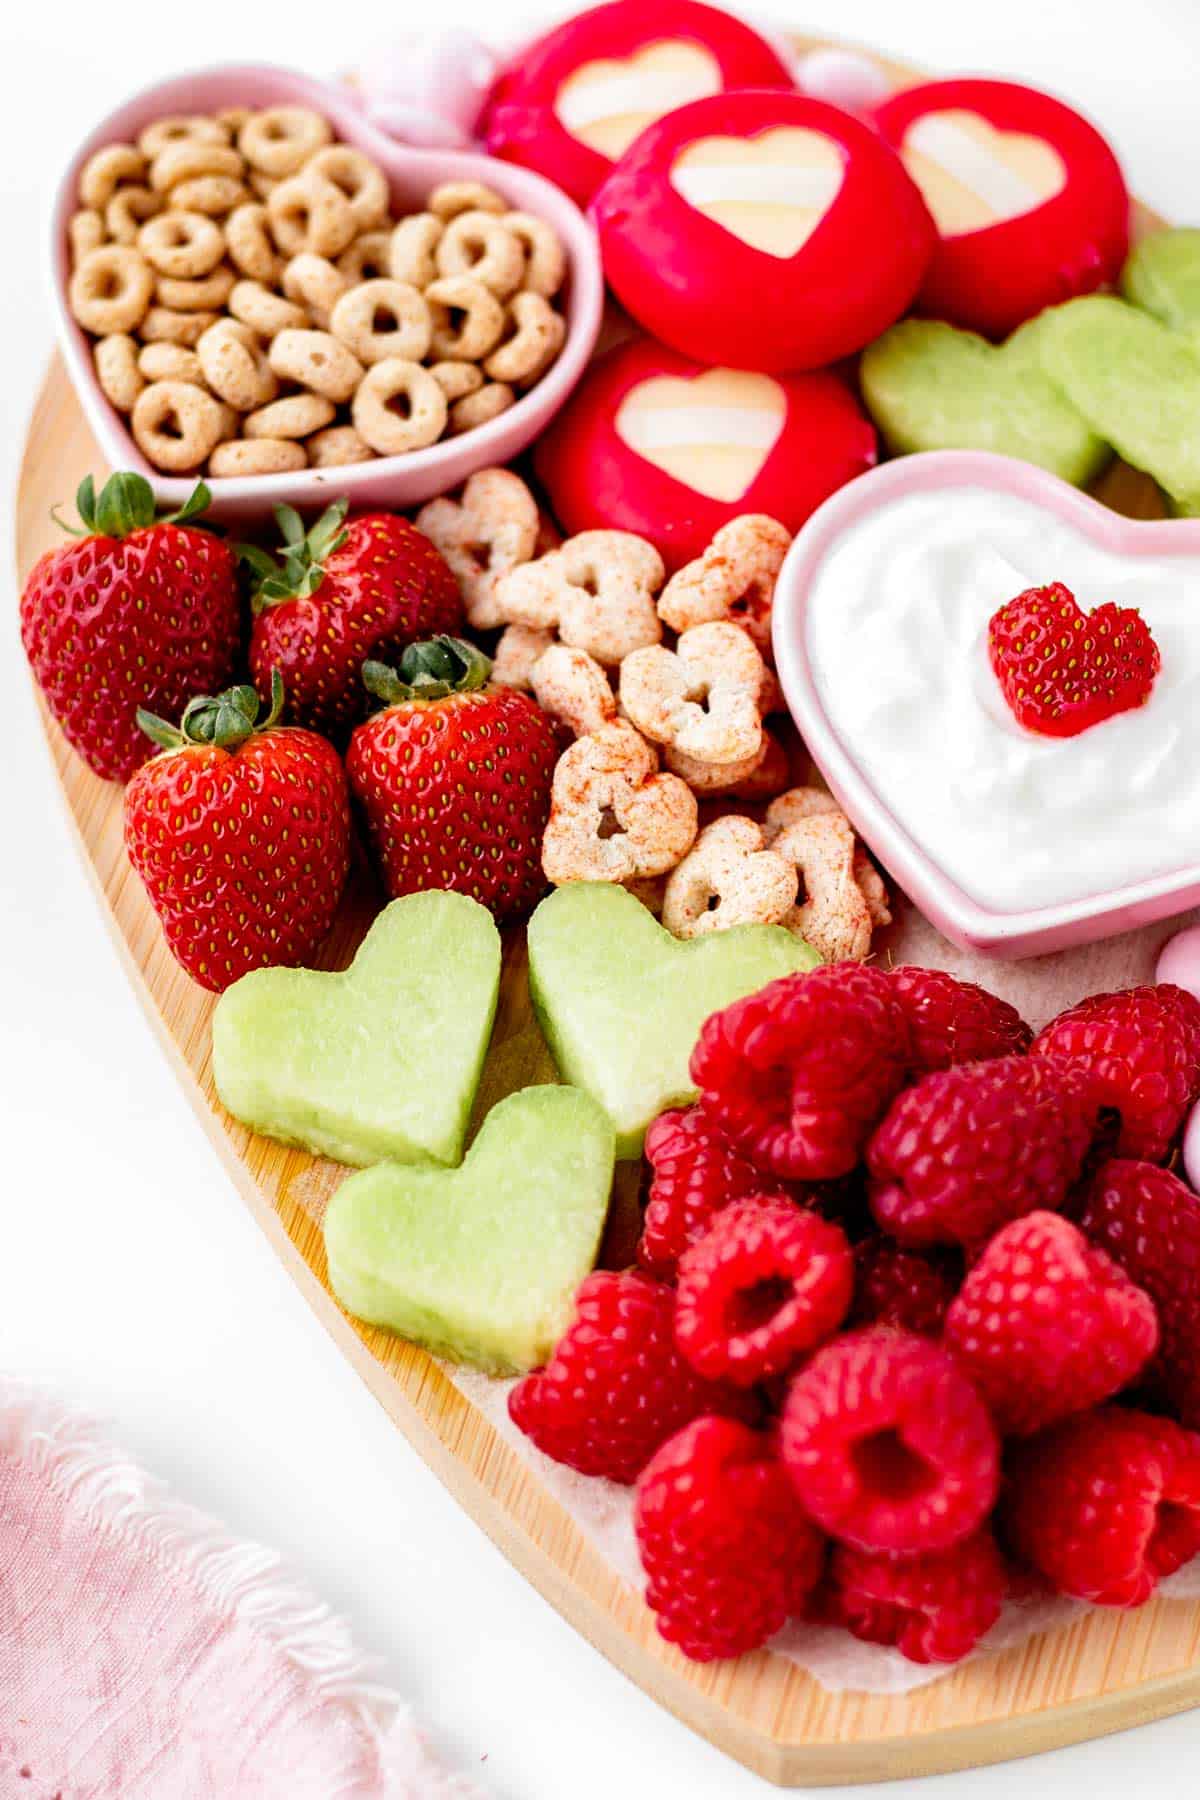 A close-up of the heart shaped charcuterie board showing raspberries, heart sandwiches, strawberries, yogurt with heart on top and cereal.